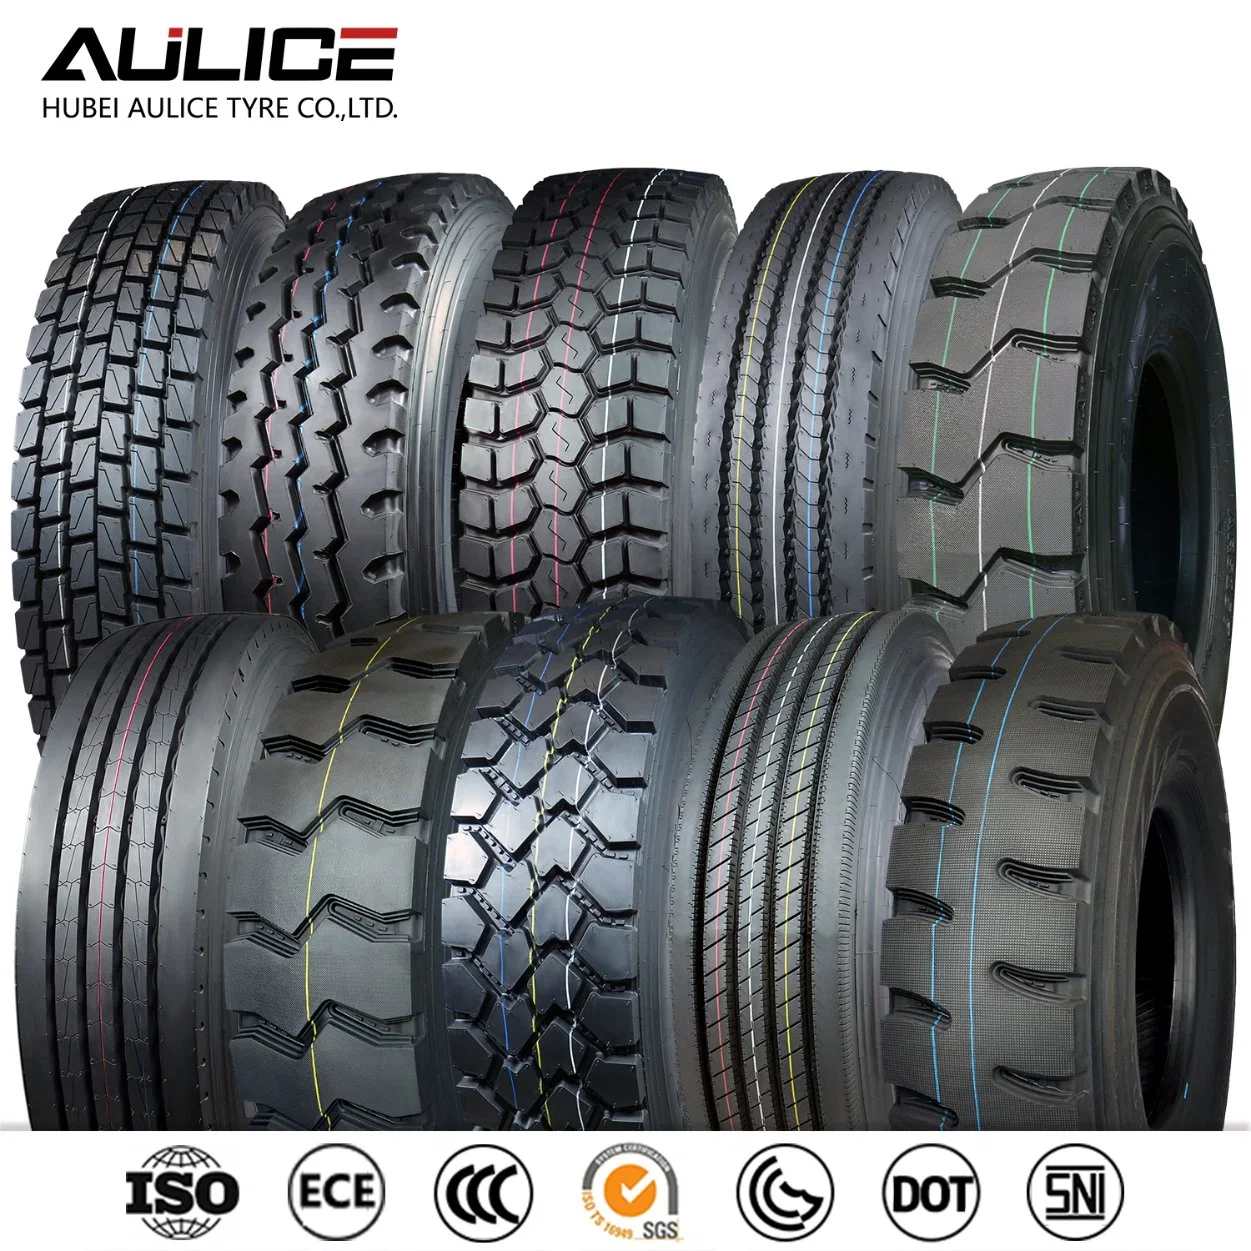 AULICE 8.25R16 9.00R20 10.00R20 11.00R20 Three Lines All Steel Radial Cheap Truck&Bus Heavy Duty Truck/Light Truck Tube Tires TBR Tyres High Load and Wearable